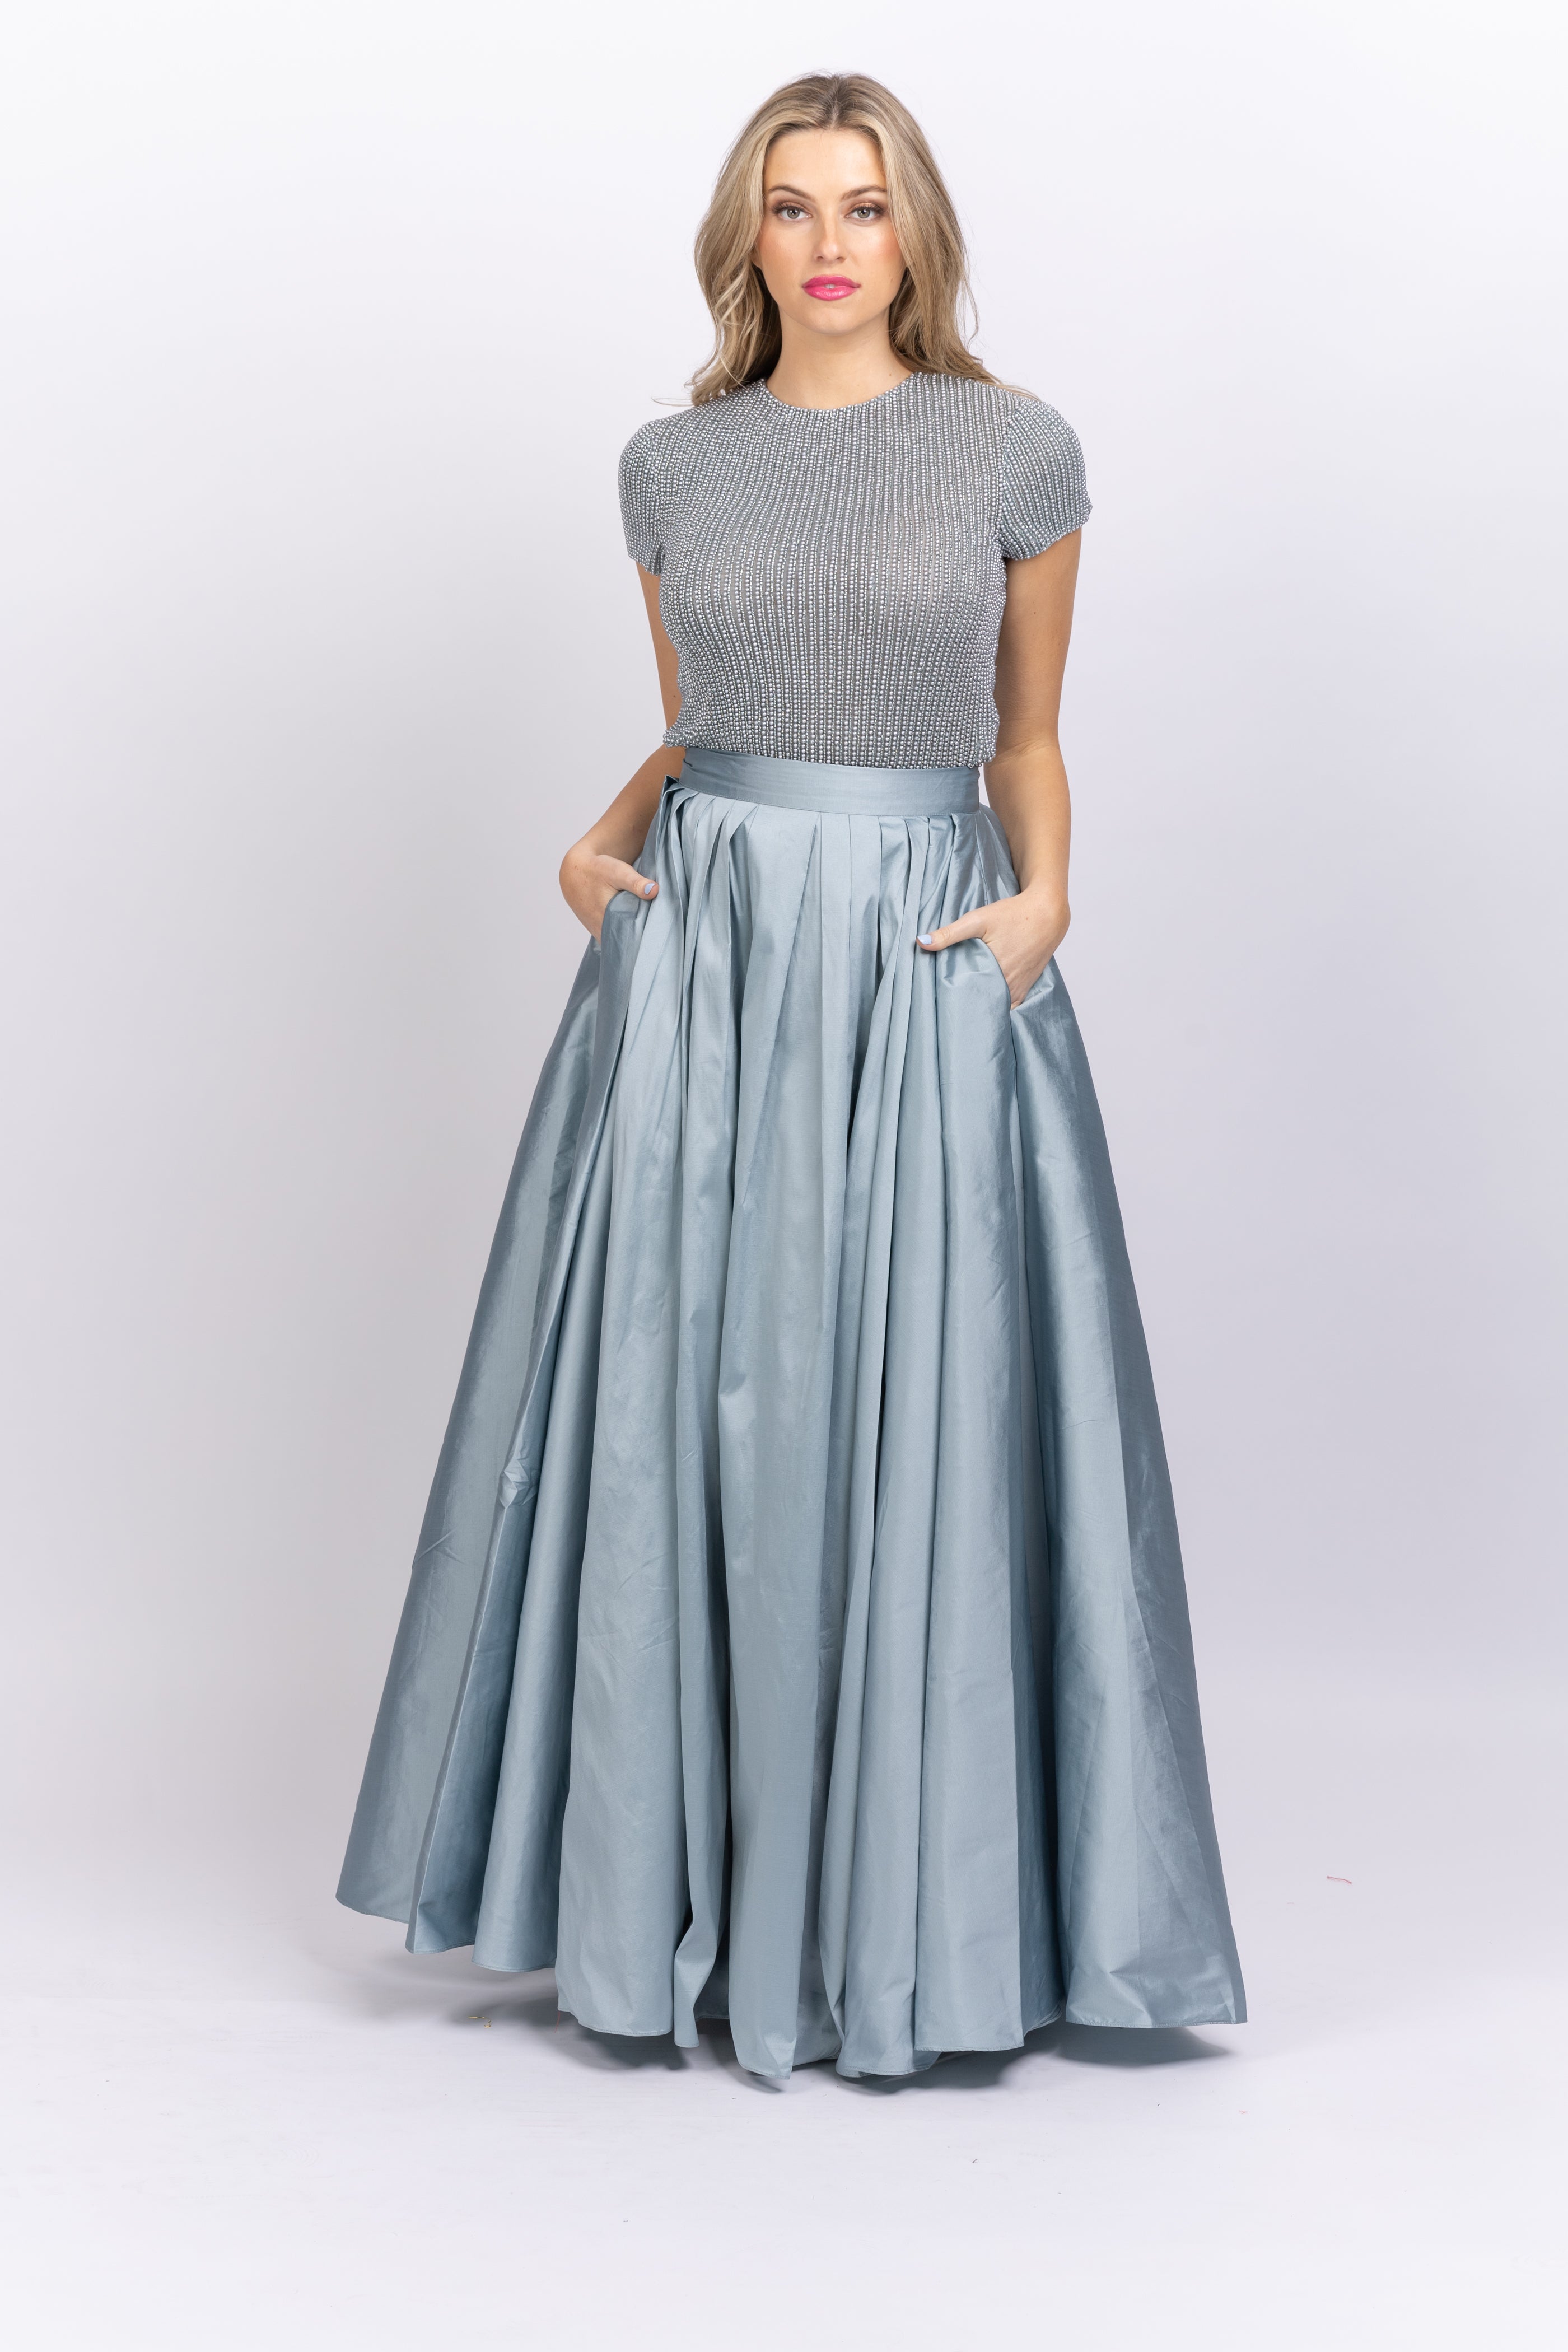 Taffeta Ball Gown with Floral Appliques on Skirt | David's Bridal